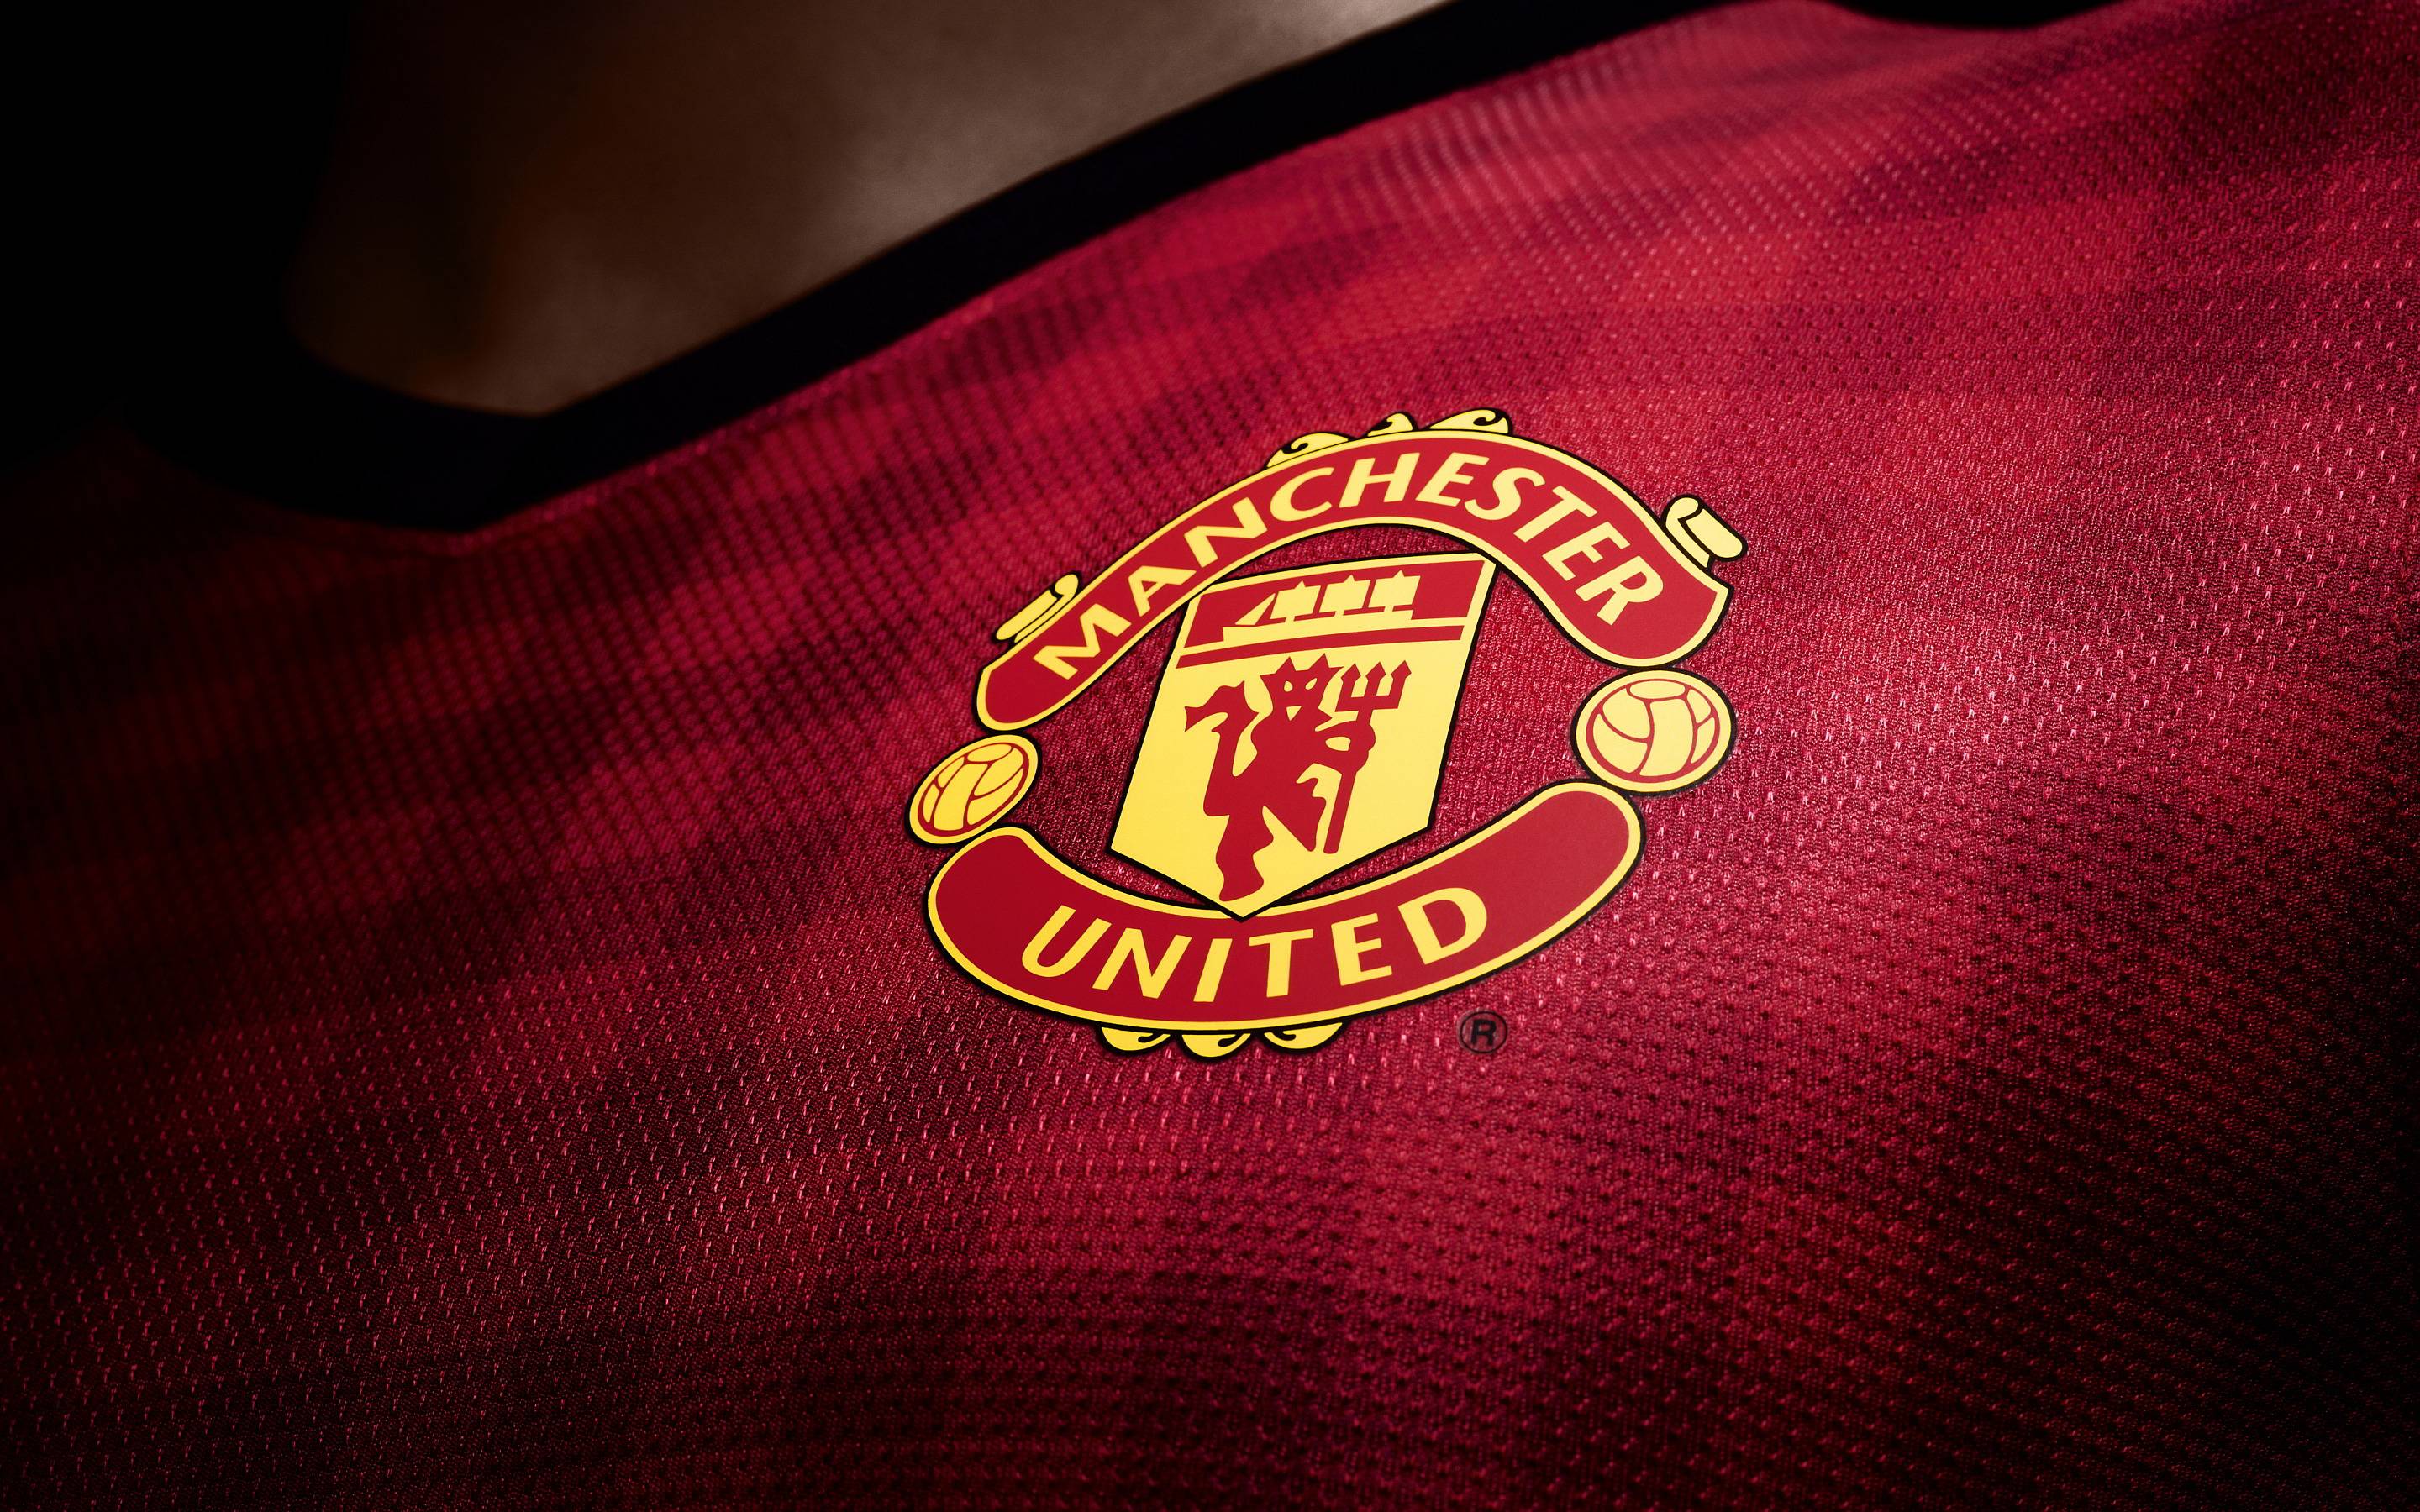 Manchester united logo Wallpapers